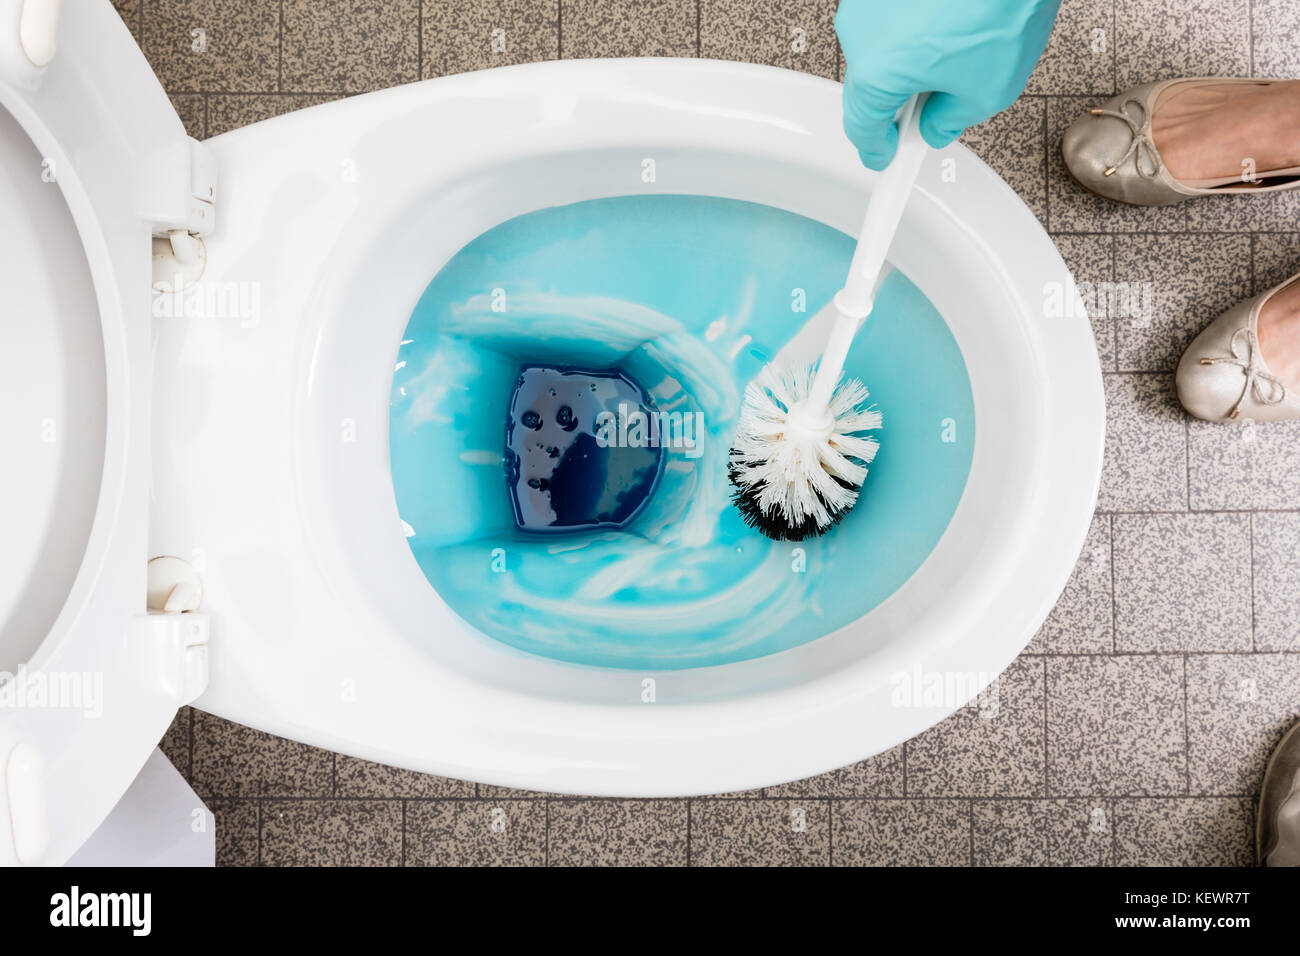 High Angle View Of A Person Cleans A Bathroom Toilet With A Scrub Brush Stock Photo